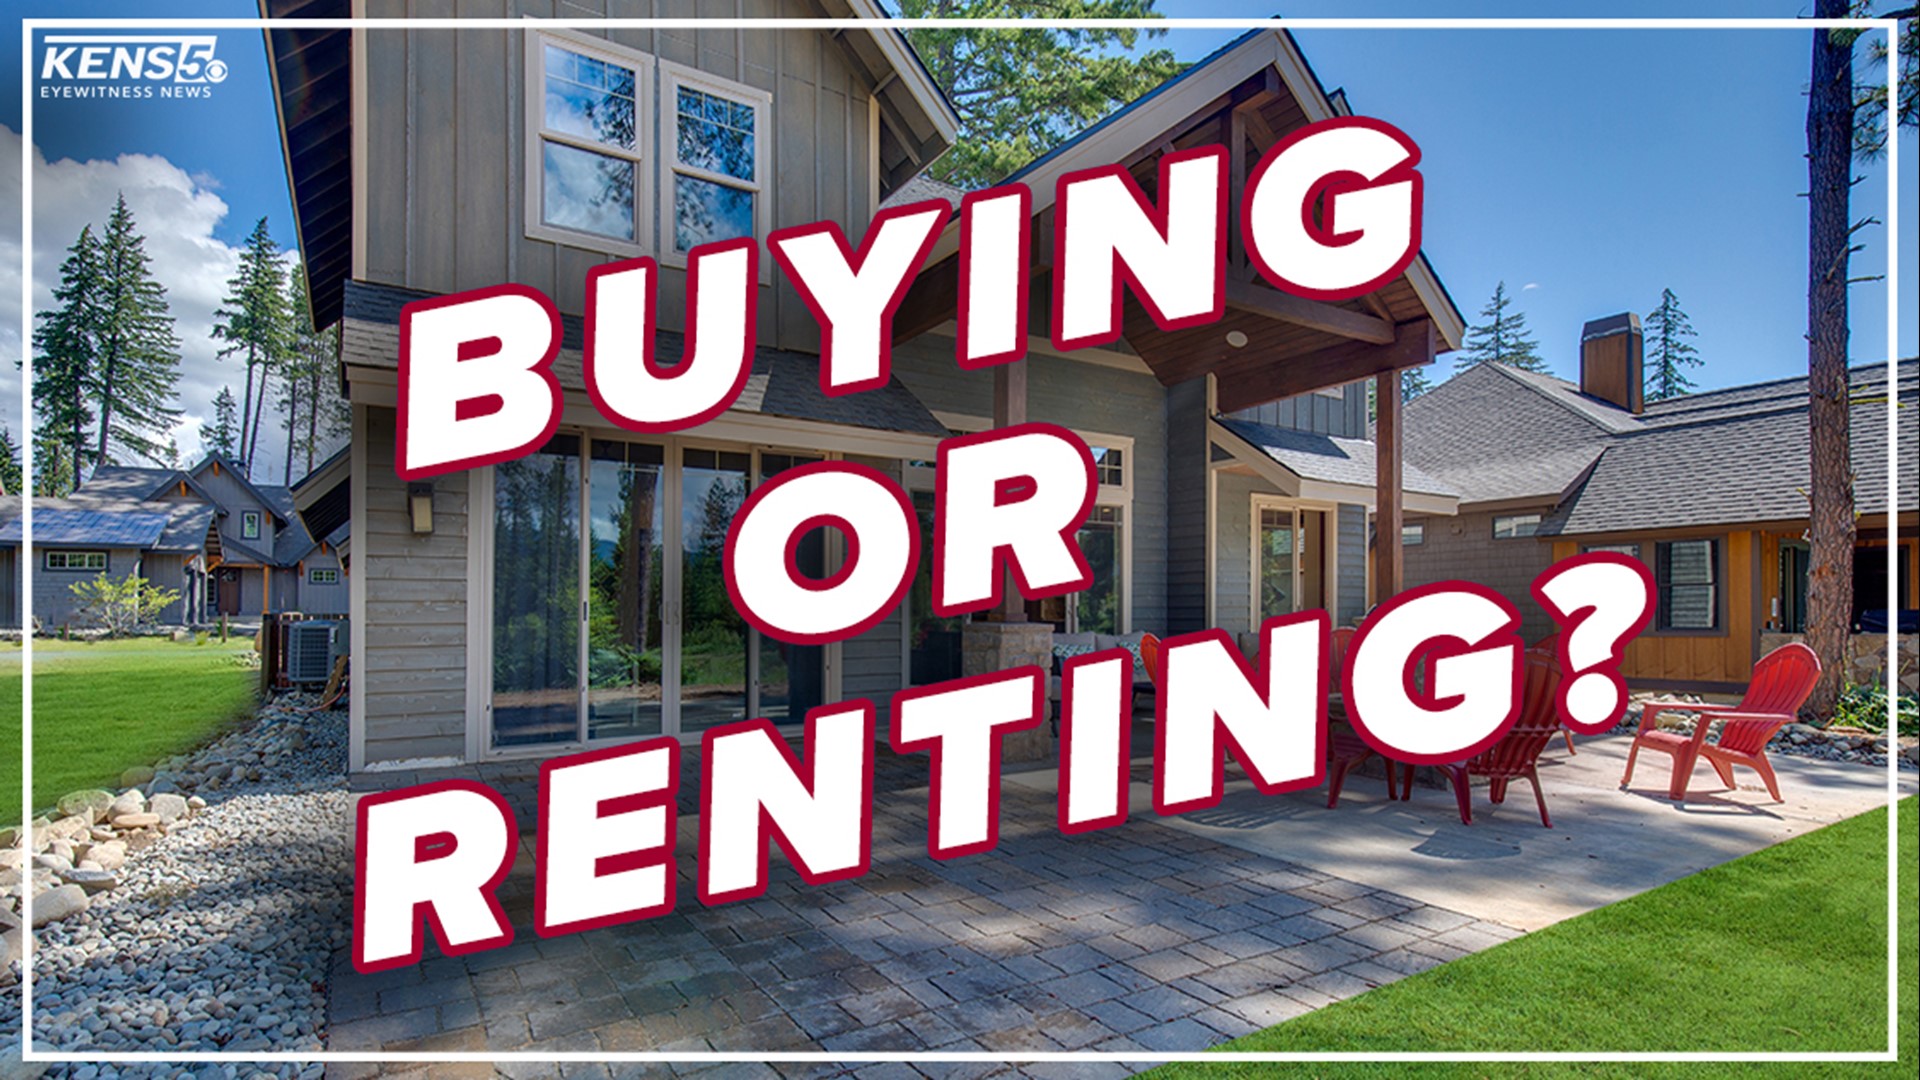 Summer is a popular time to make a move and whether you are looking to buy or rent – costs of both are going up, according to the San Antonio Board of Realtors.